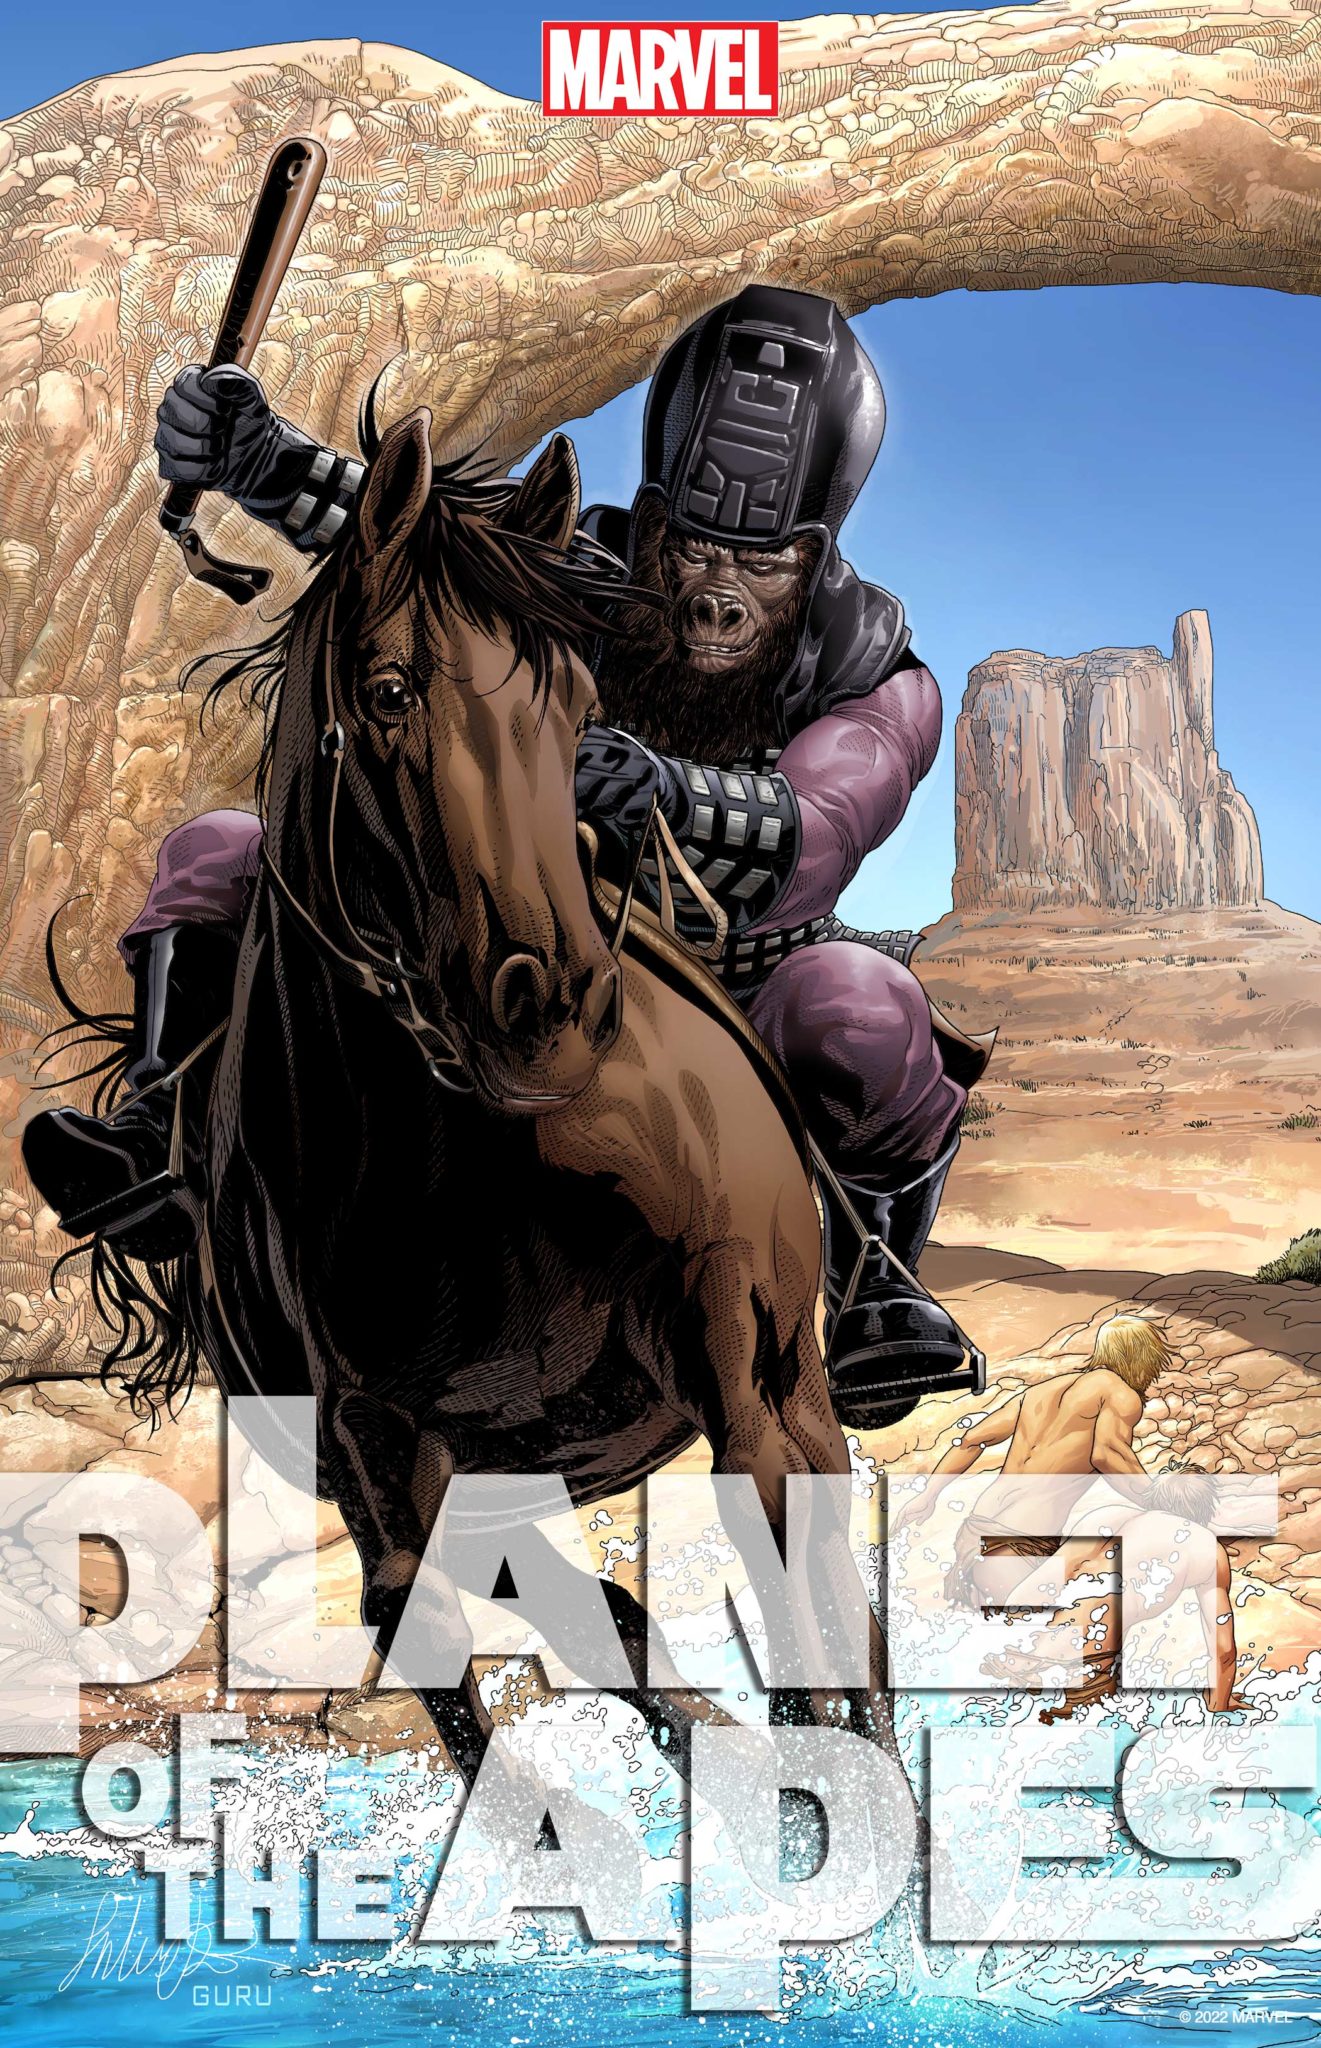 Marvel Planet of the Apes teaser